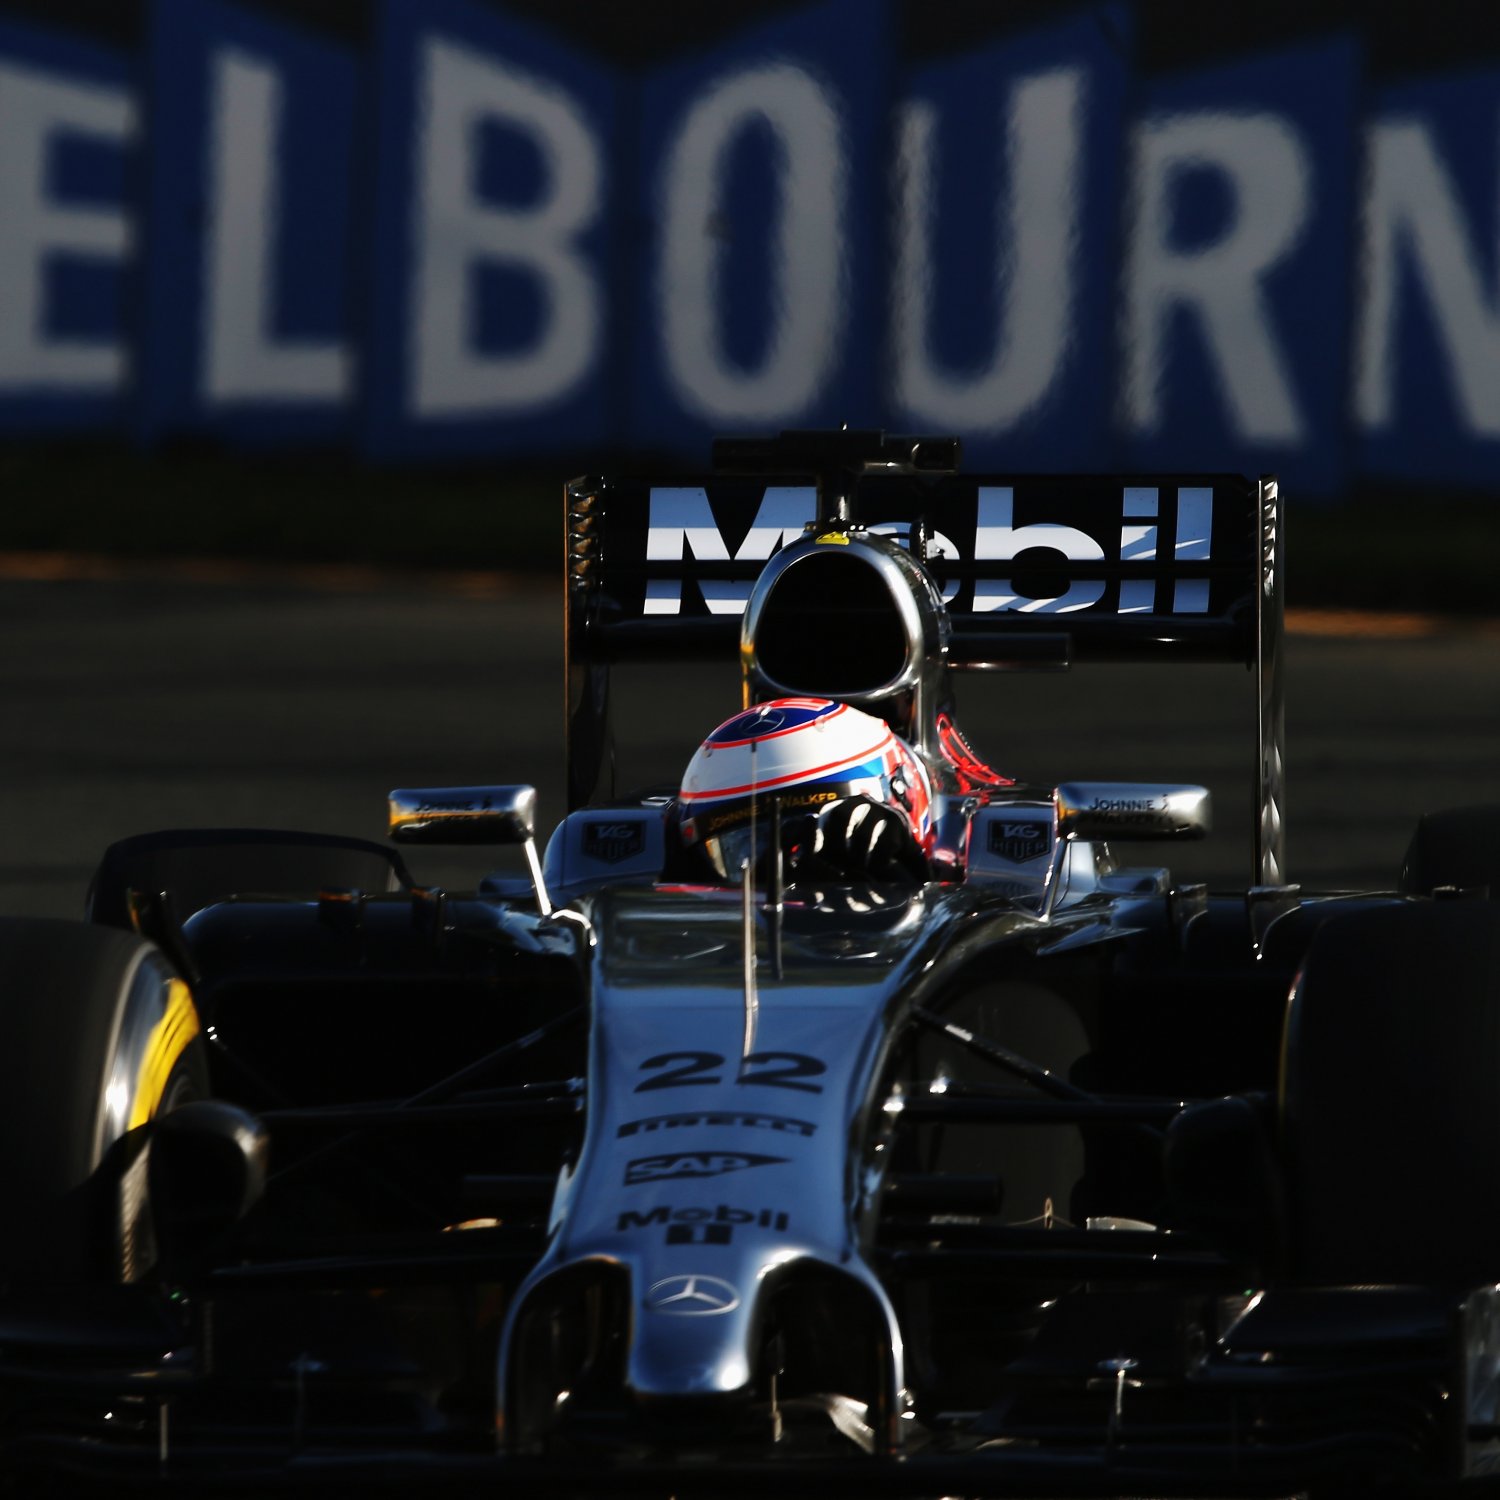 Australian Formula 1 Grand Prix 2014 Results, Times for Practice and